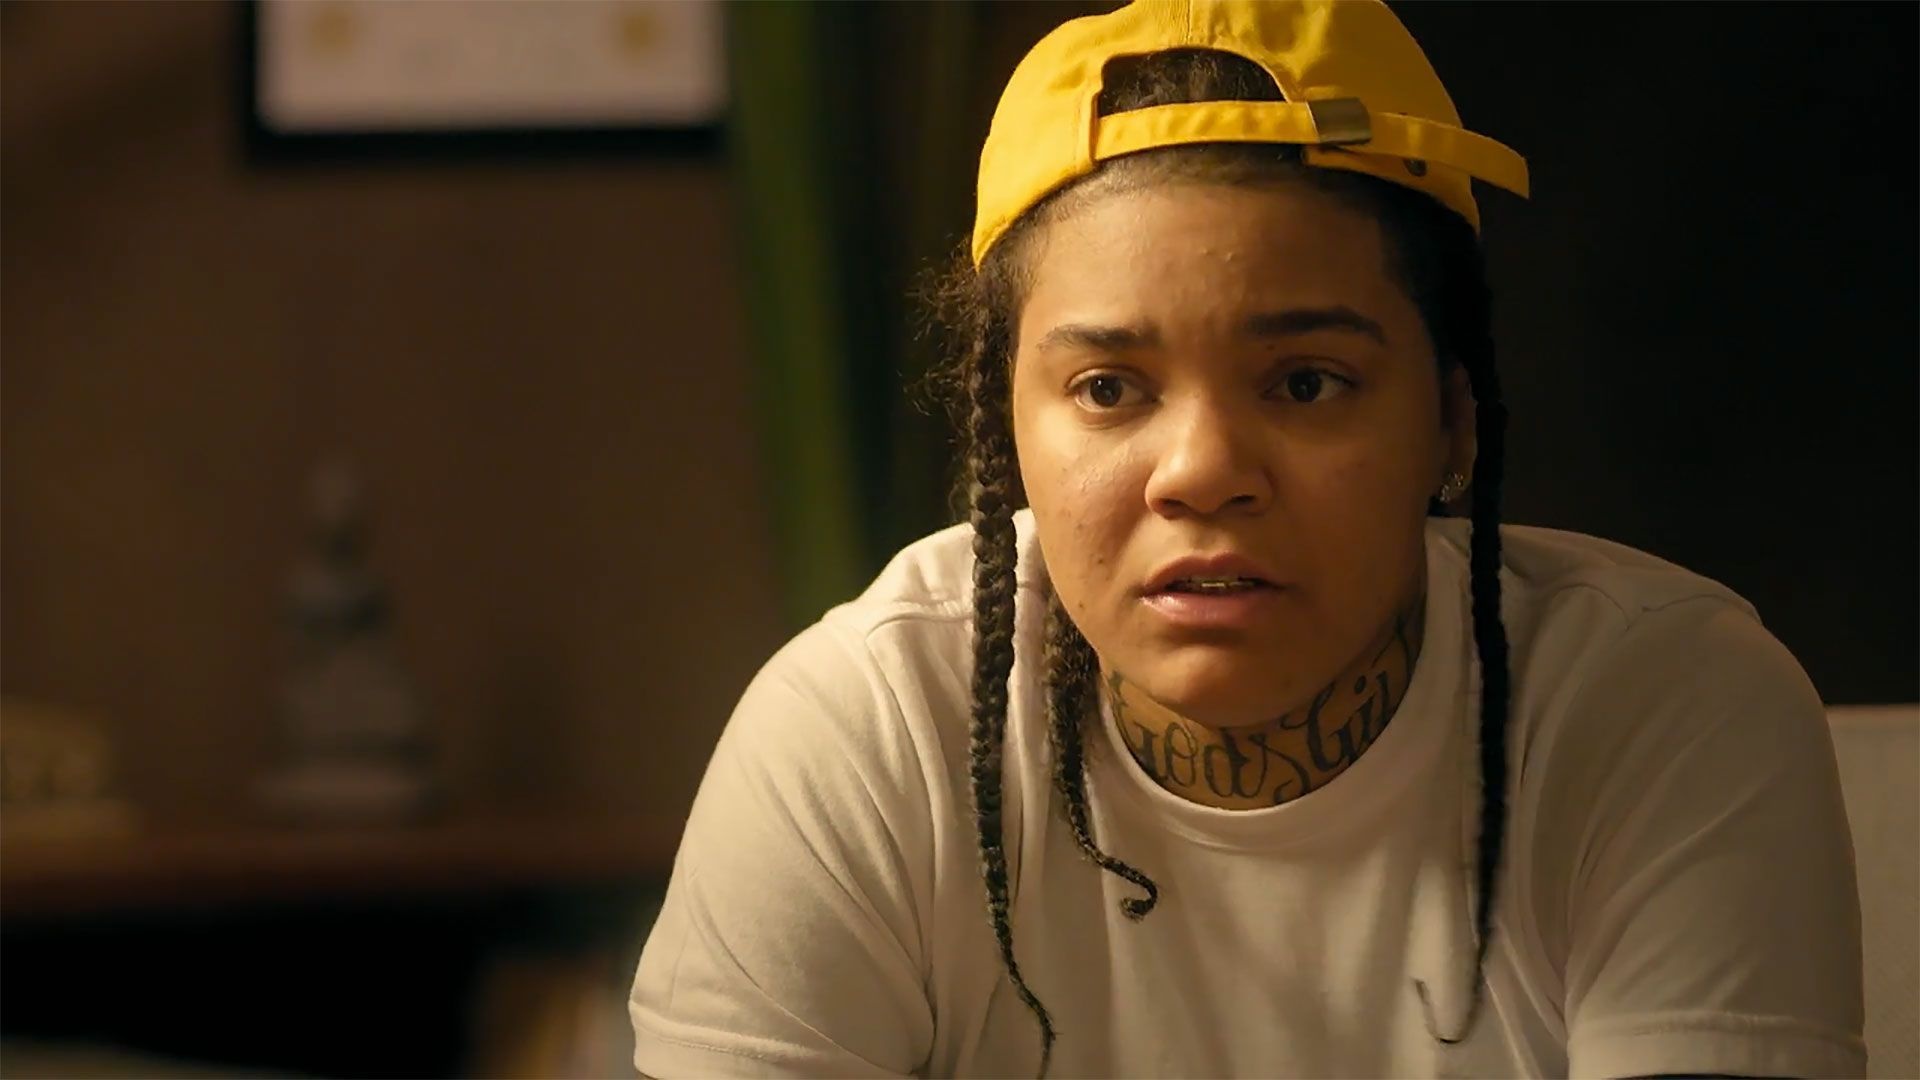 Young M.A: Released a song, "Body Bag", which became a YouTube hit in 2015. 1920x1080 Full HD Background.